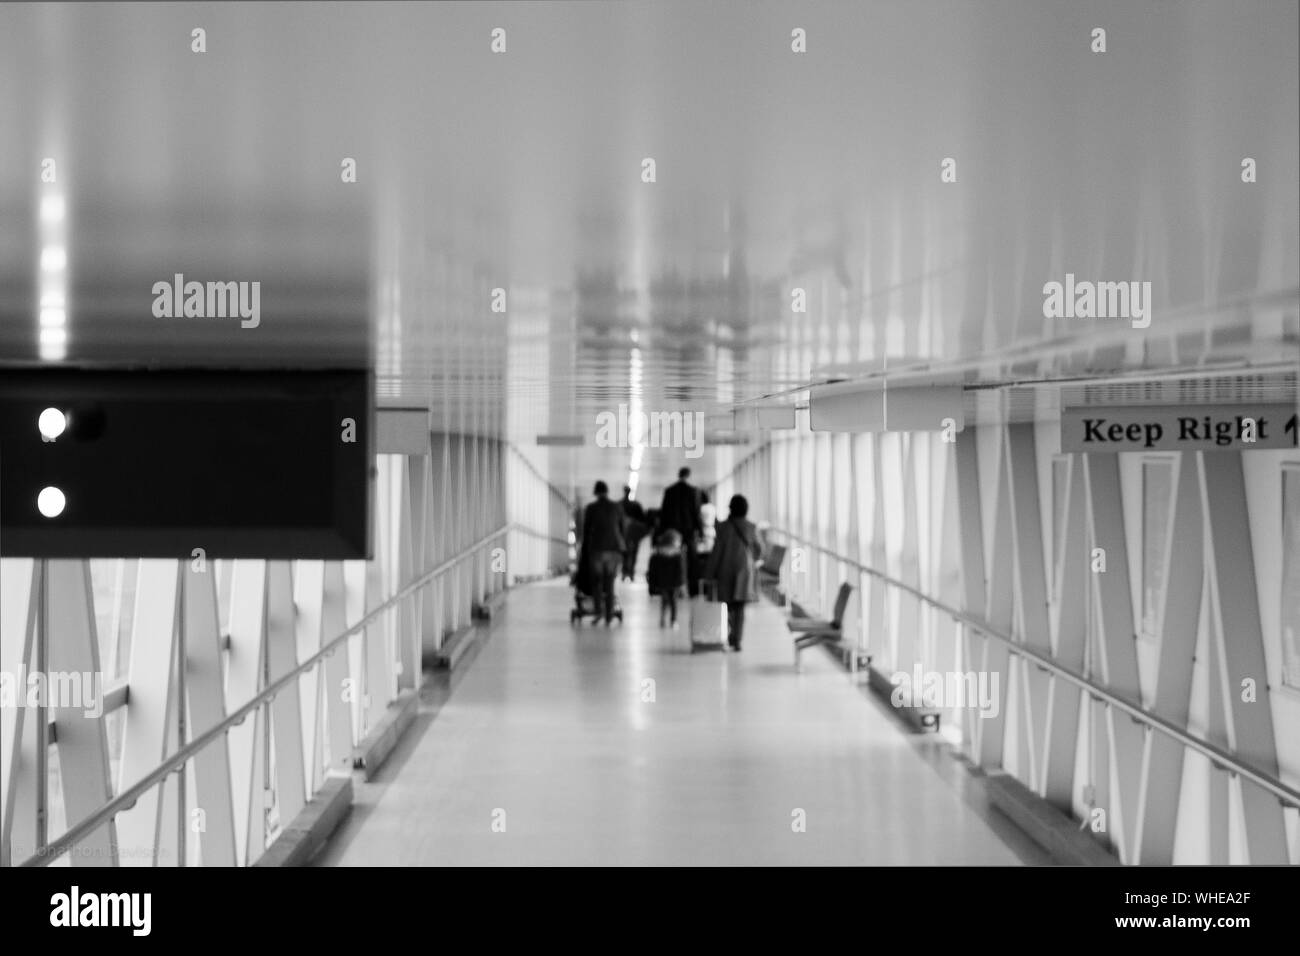 People Walking In Passage Of Stansted Airport Stock Photo